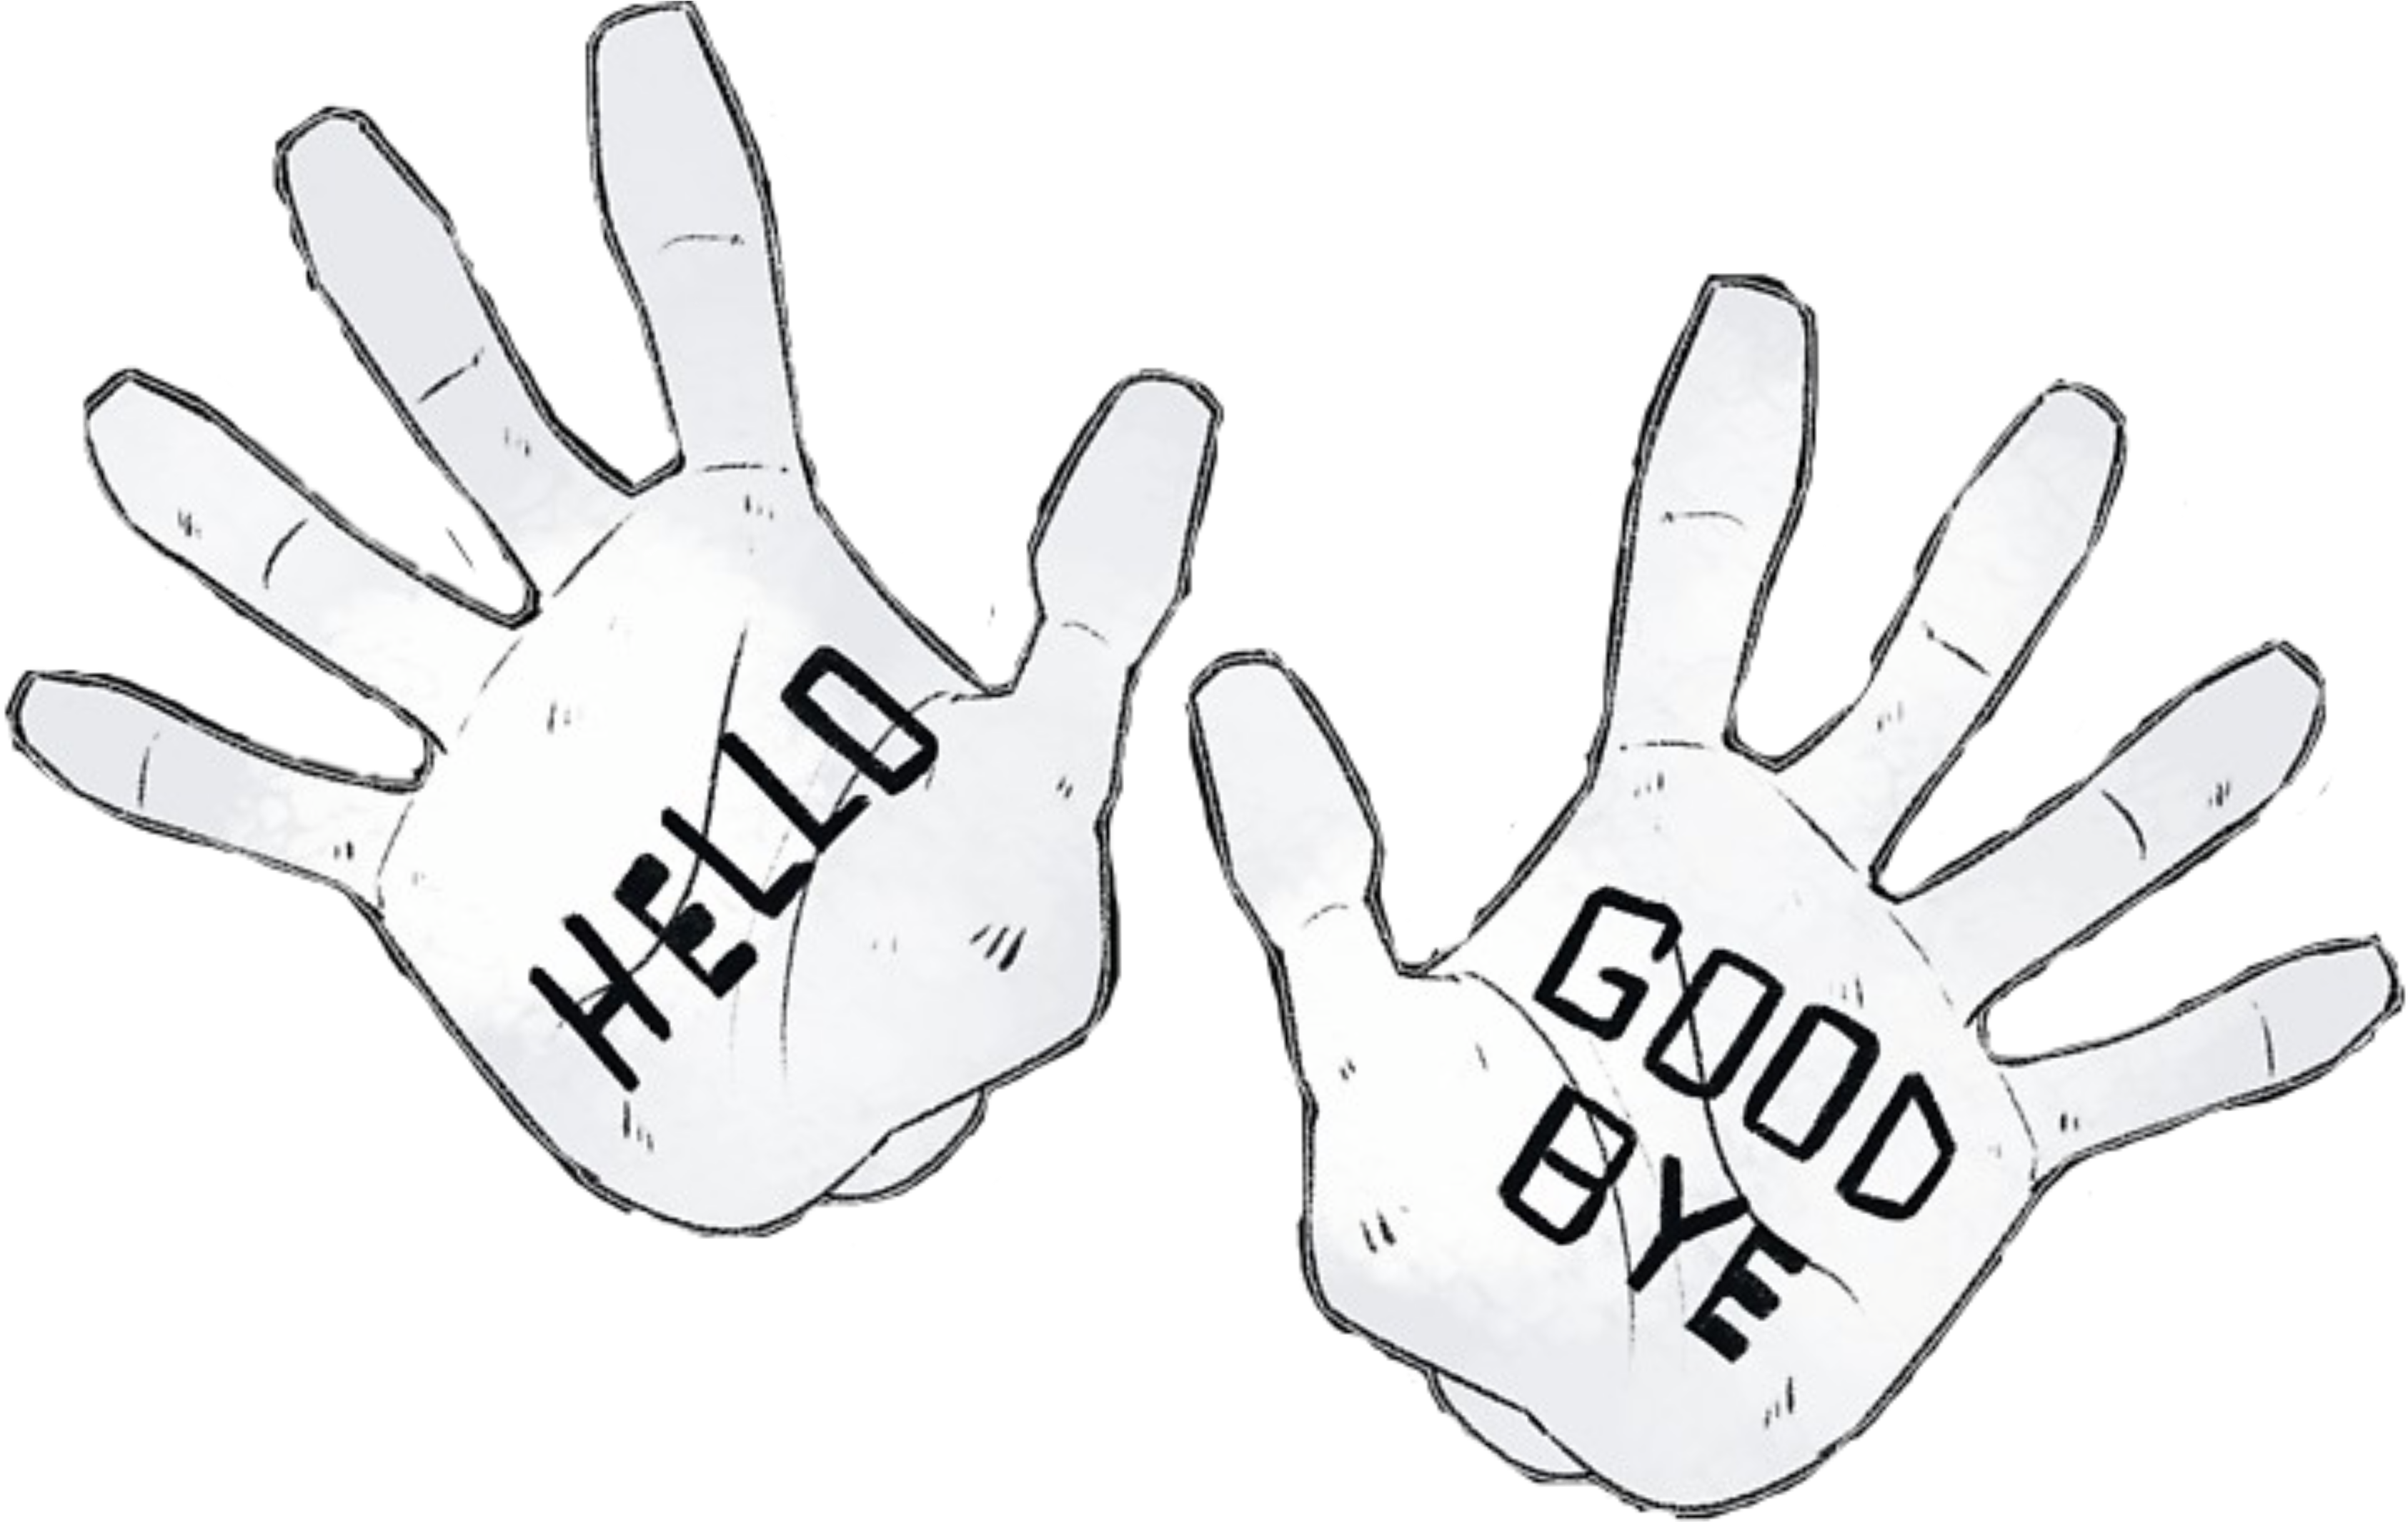 A Pair Of Hands With Text On Them